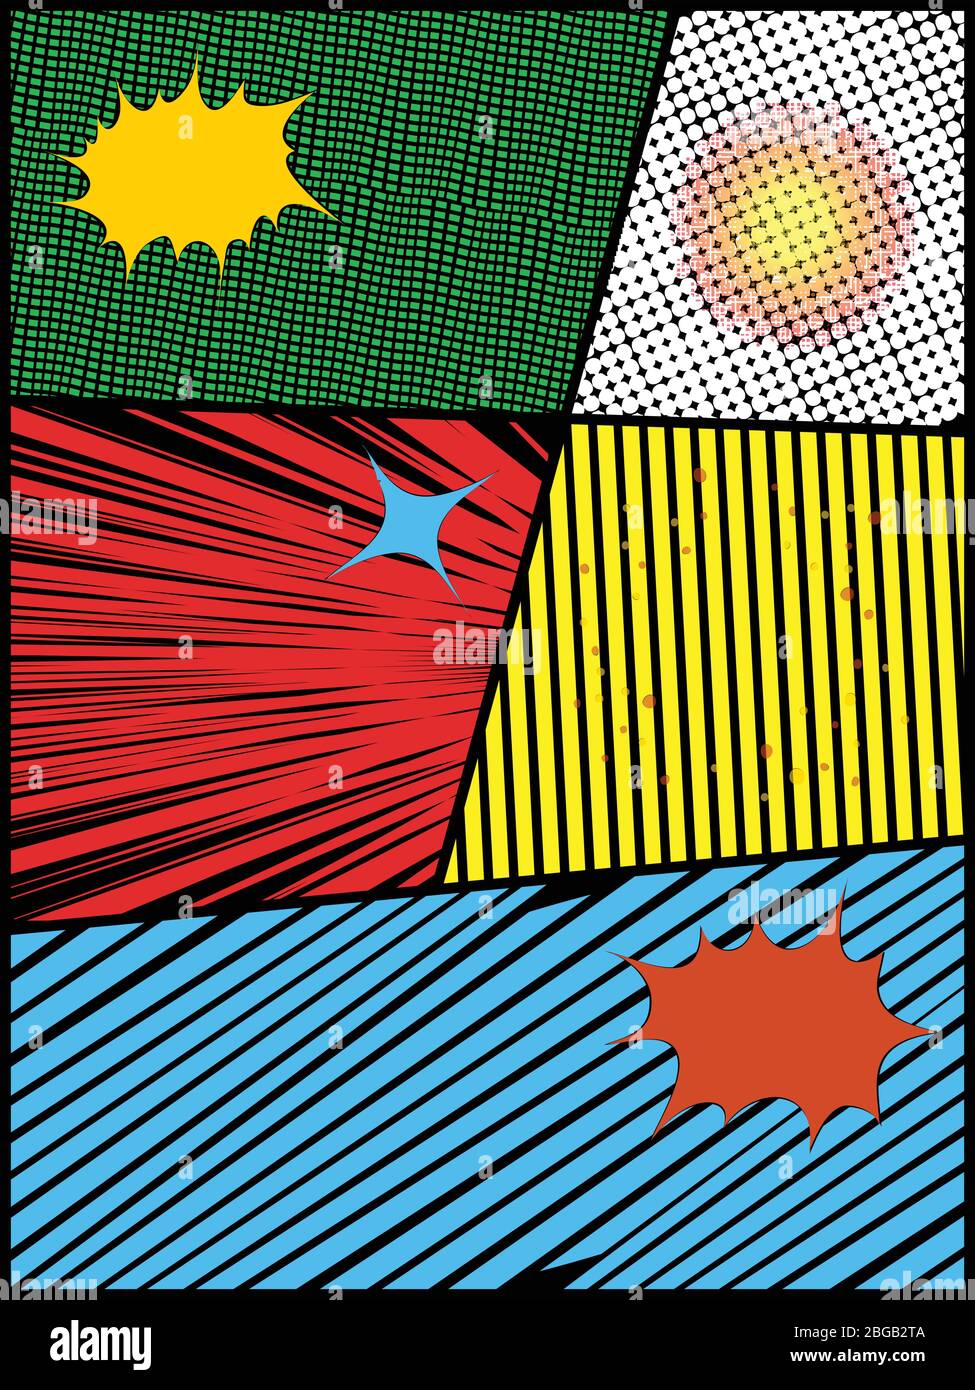 Comics Book Style Layout Blank Copy Space With Vibrant Colors Portrait On Black With Explosions And Star Stock Vector